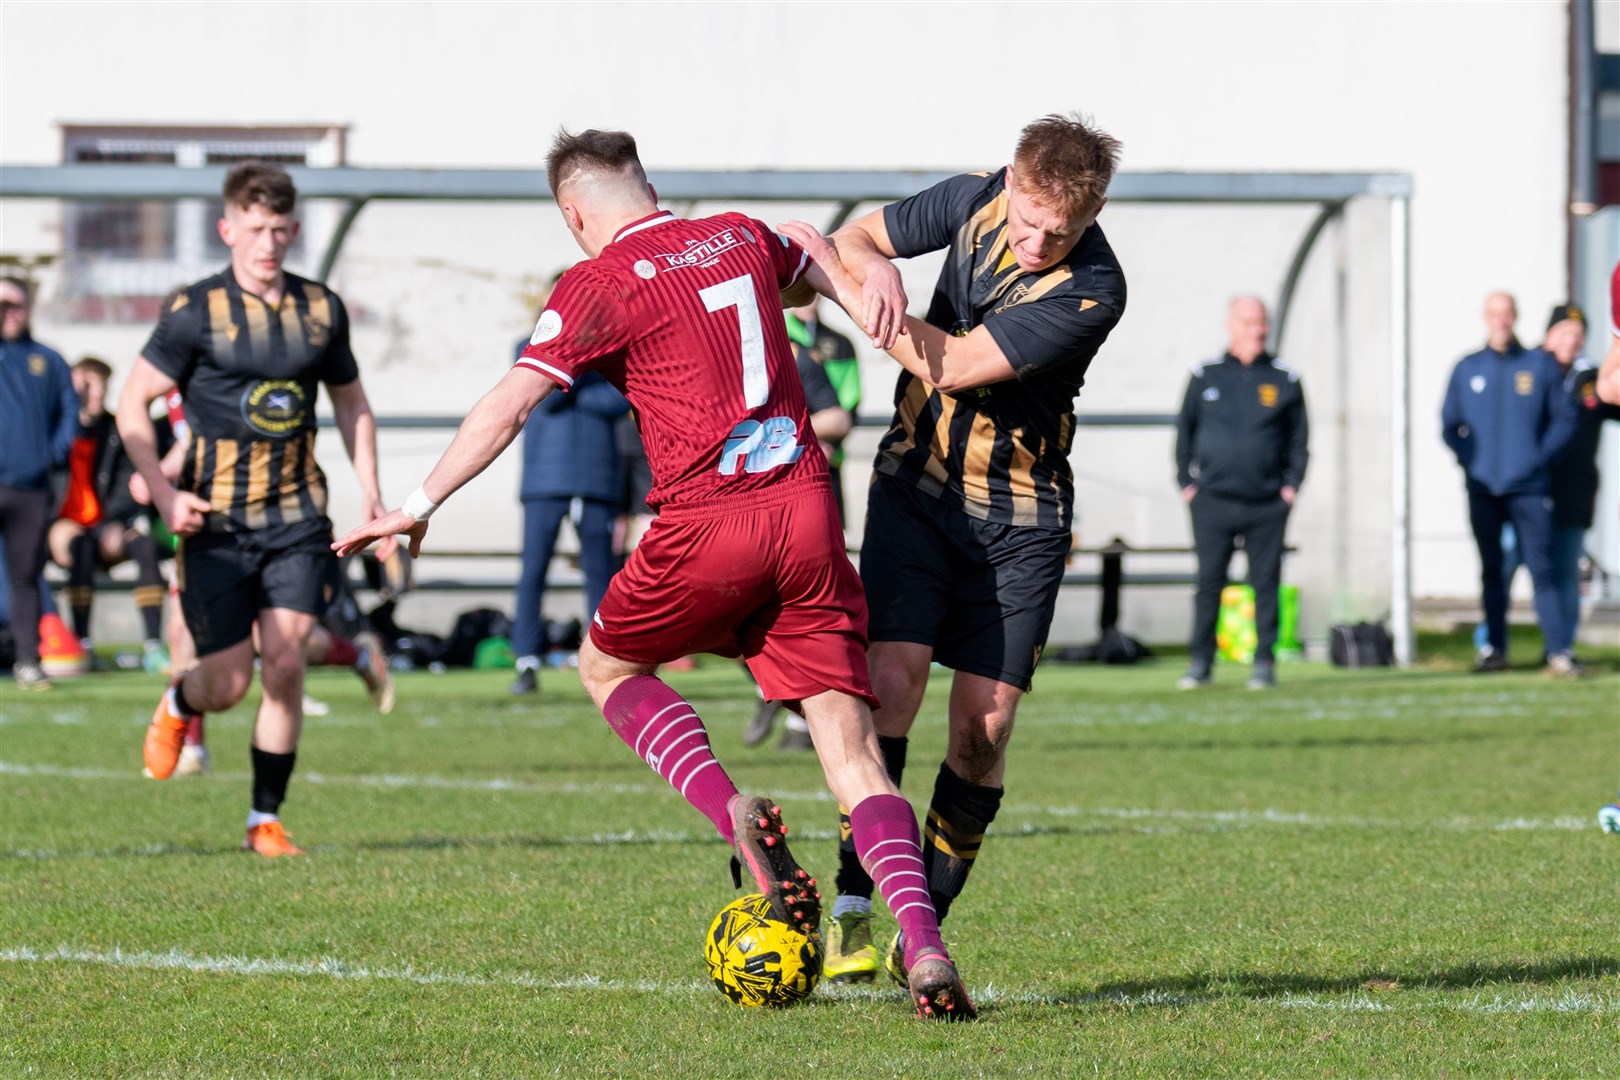 Keith's Gavin Elphinstone makes a successful tackle against Huntly's Ryan Sewell.Keith F.C (1) v Huntly F.C (0) at Kynoch Park, Keith. Highland Football League.Picture: Beth Taylor